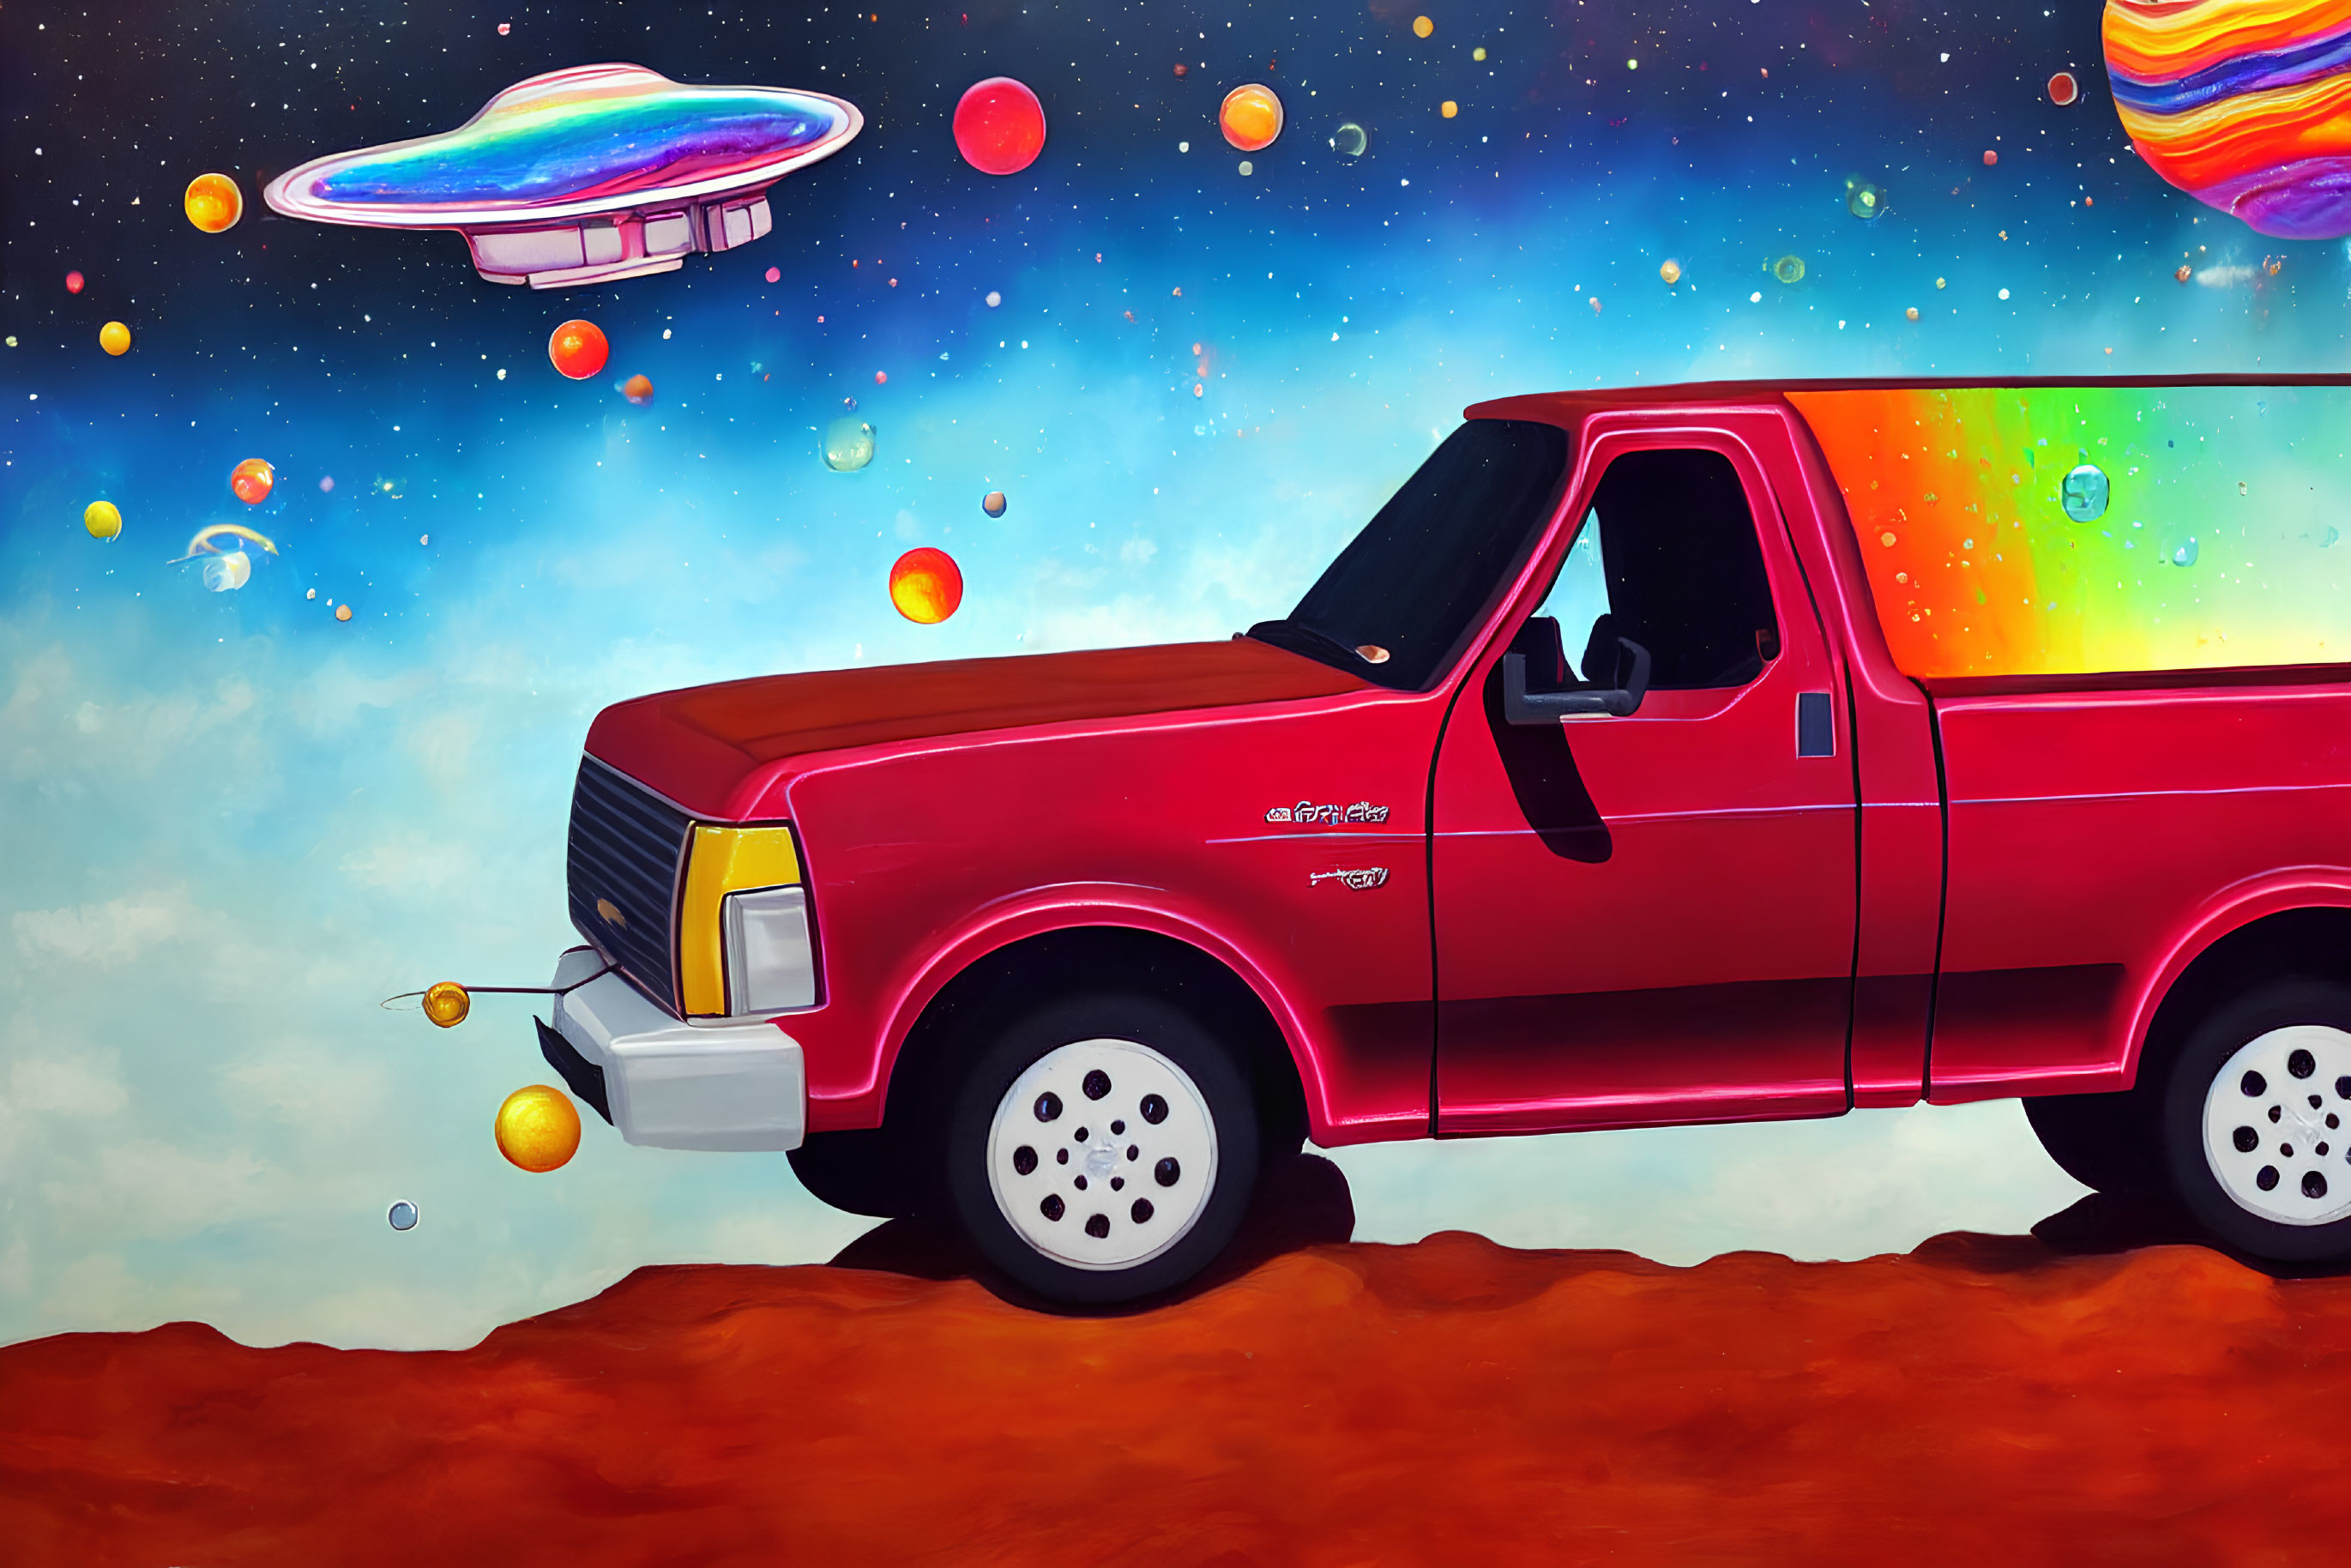 Digital illustration of red pickup truck on Martian landscape with planets, stars, and flying saucer.